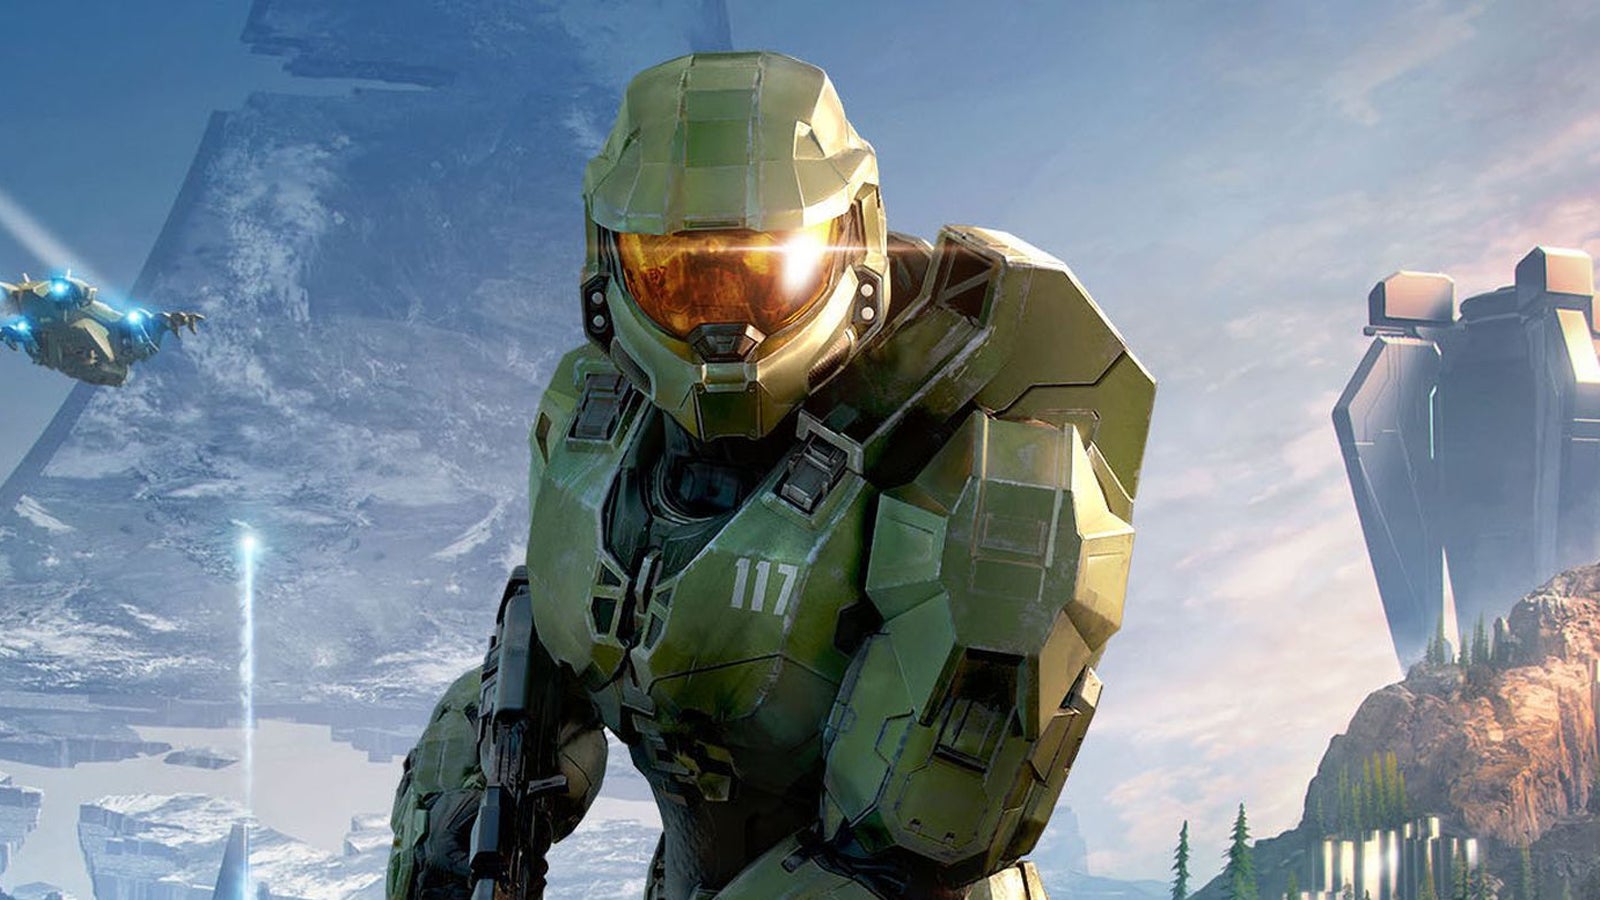 Image for Marty O'Donnell and Microsoft's Halo music lawsuit "amicably resolved"